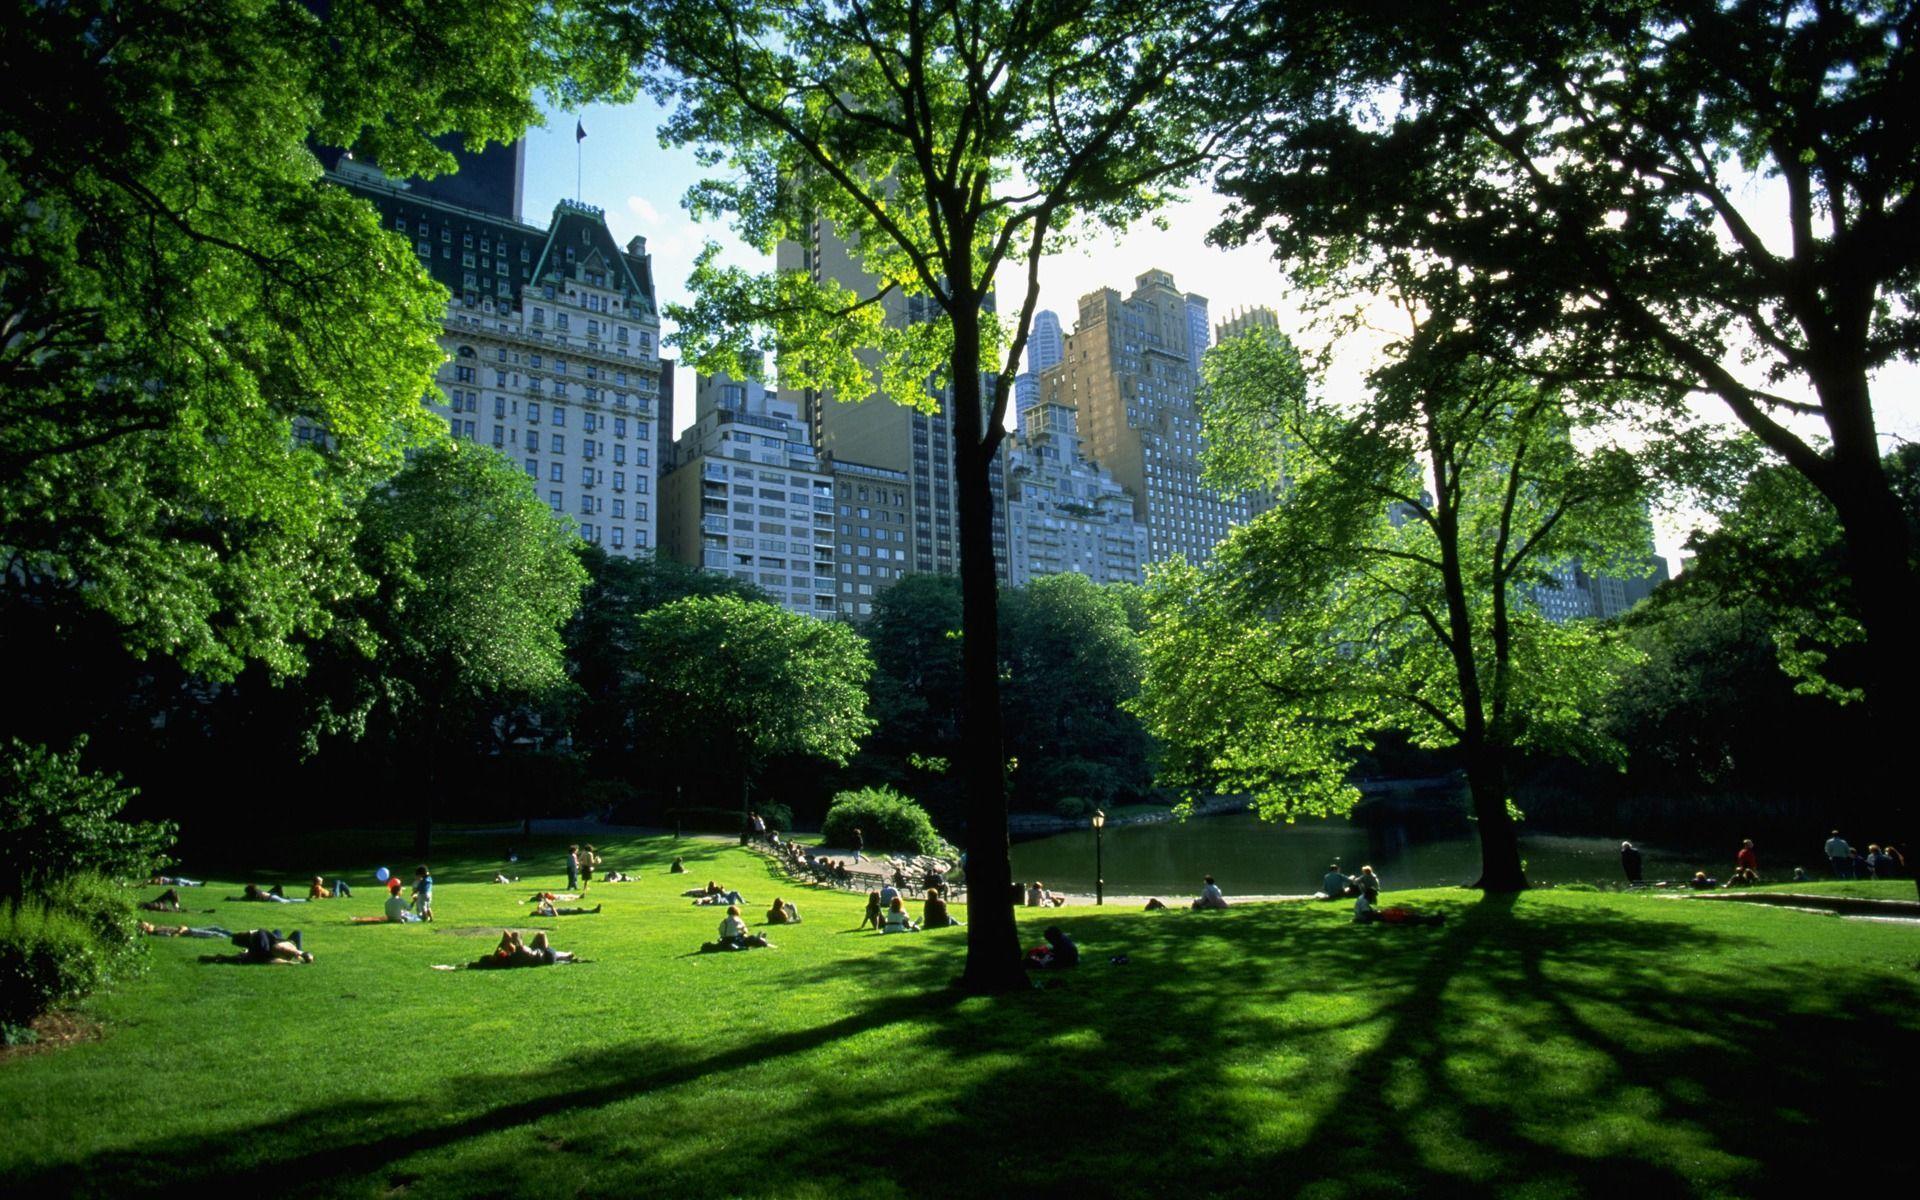 Central Park, NY wallpaper and image, picture, photo